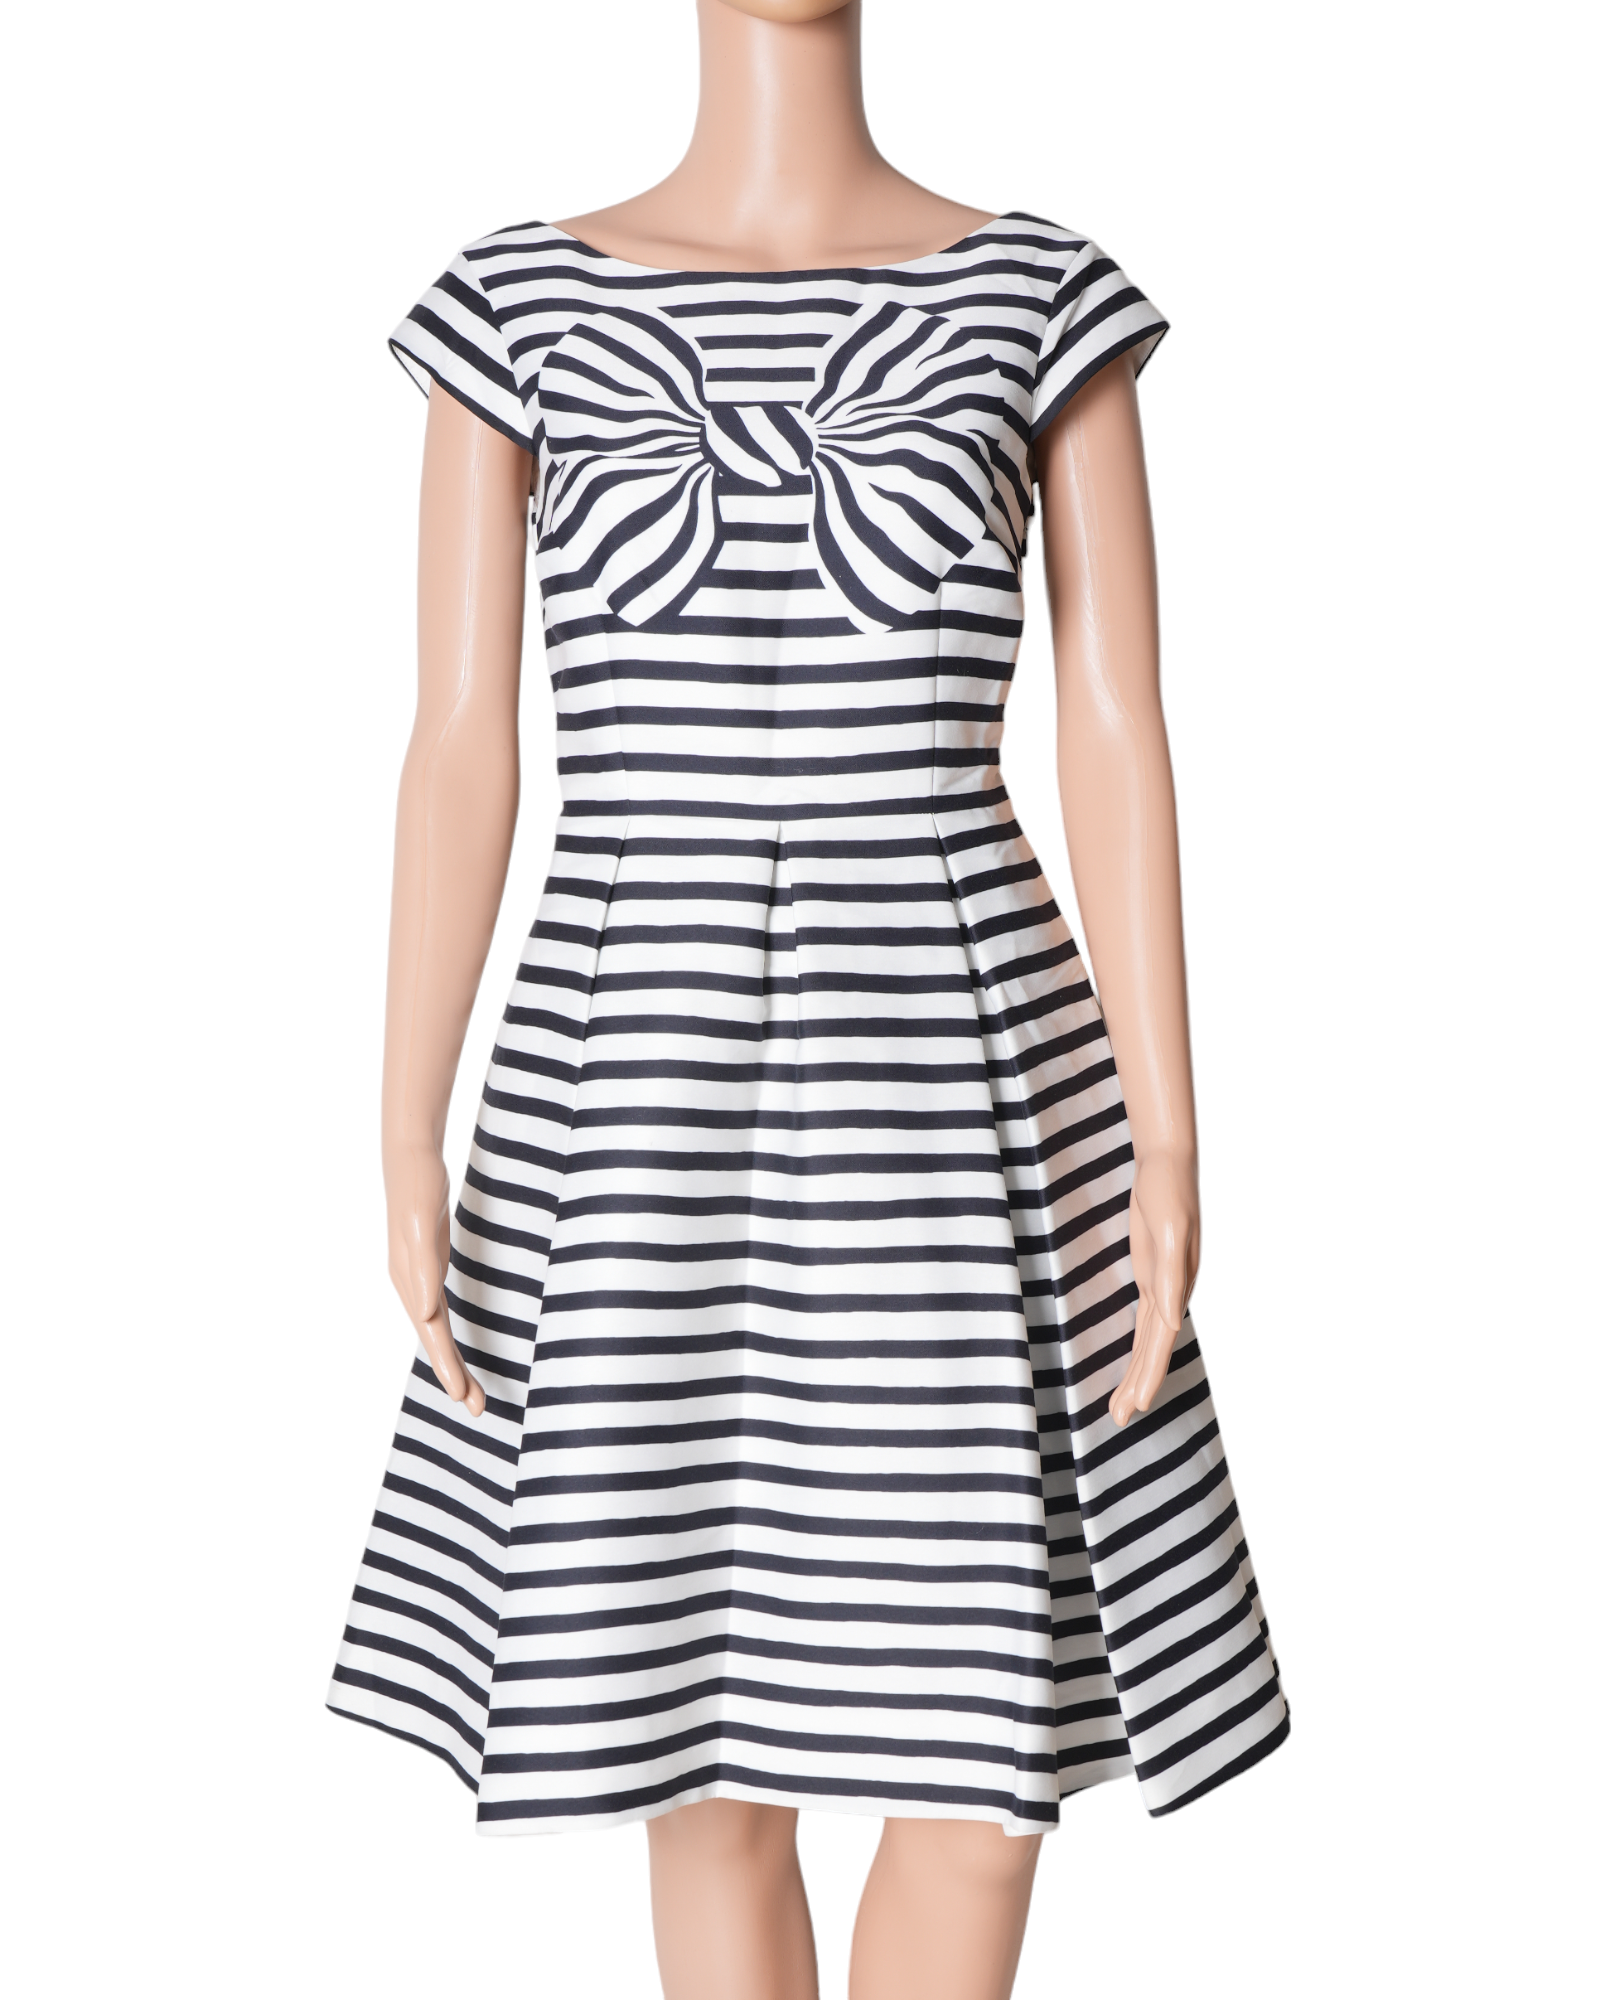 Kate Spade New York Bow Stripe Mariellr Fitted Dress